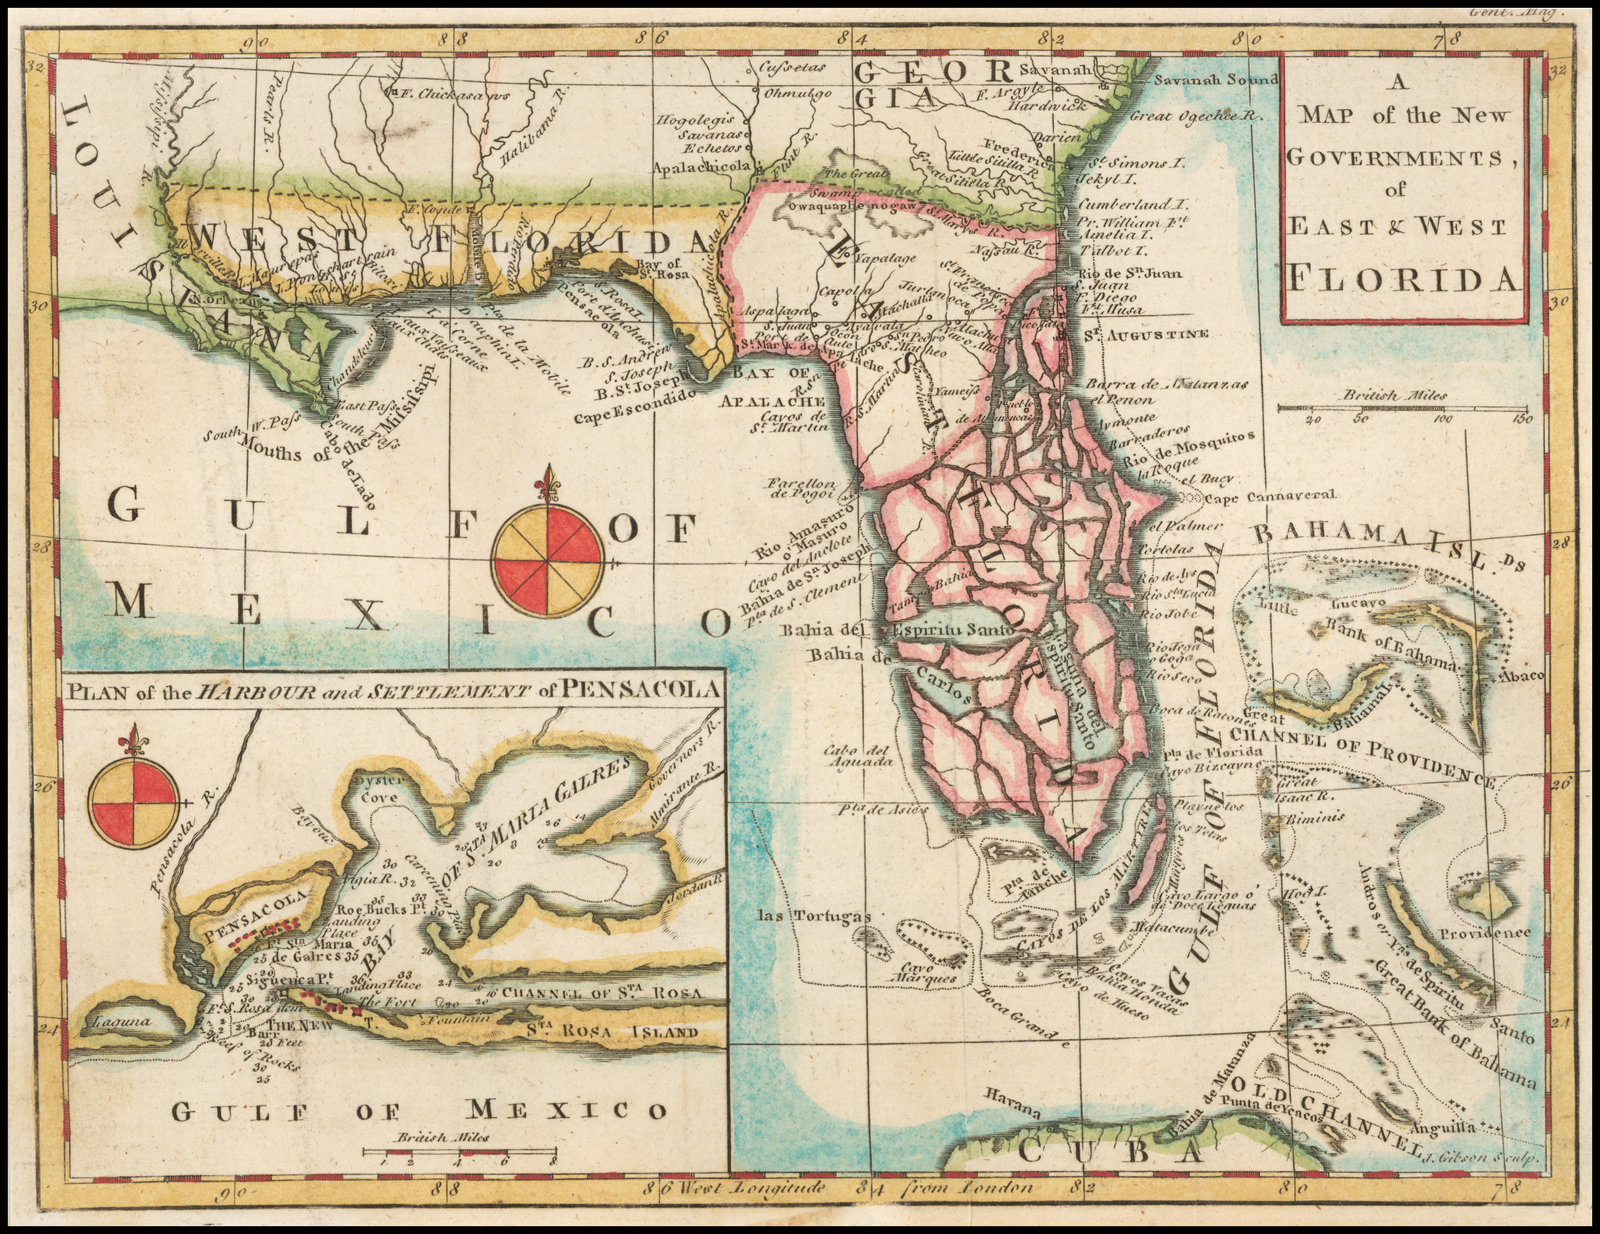 In 1763, Great Britain took control of Florida and divided the territory into East and West Florida. Although they understood their new possession poorly, as can be seen in this map pubklished in Gentleman's Magazine that year, the British initiated a survey of the area that created increased knowledge.  Royal efforts to populate the new colonies proved so successful that they refused to follow the Thirteen Colonies in rebelling against the King. Courtesy of Barry Lawrence Ruderman.